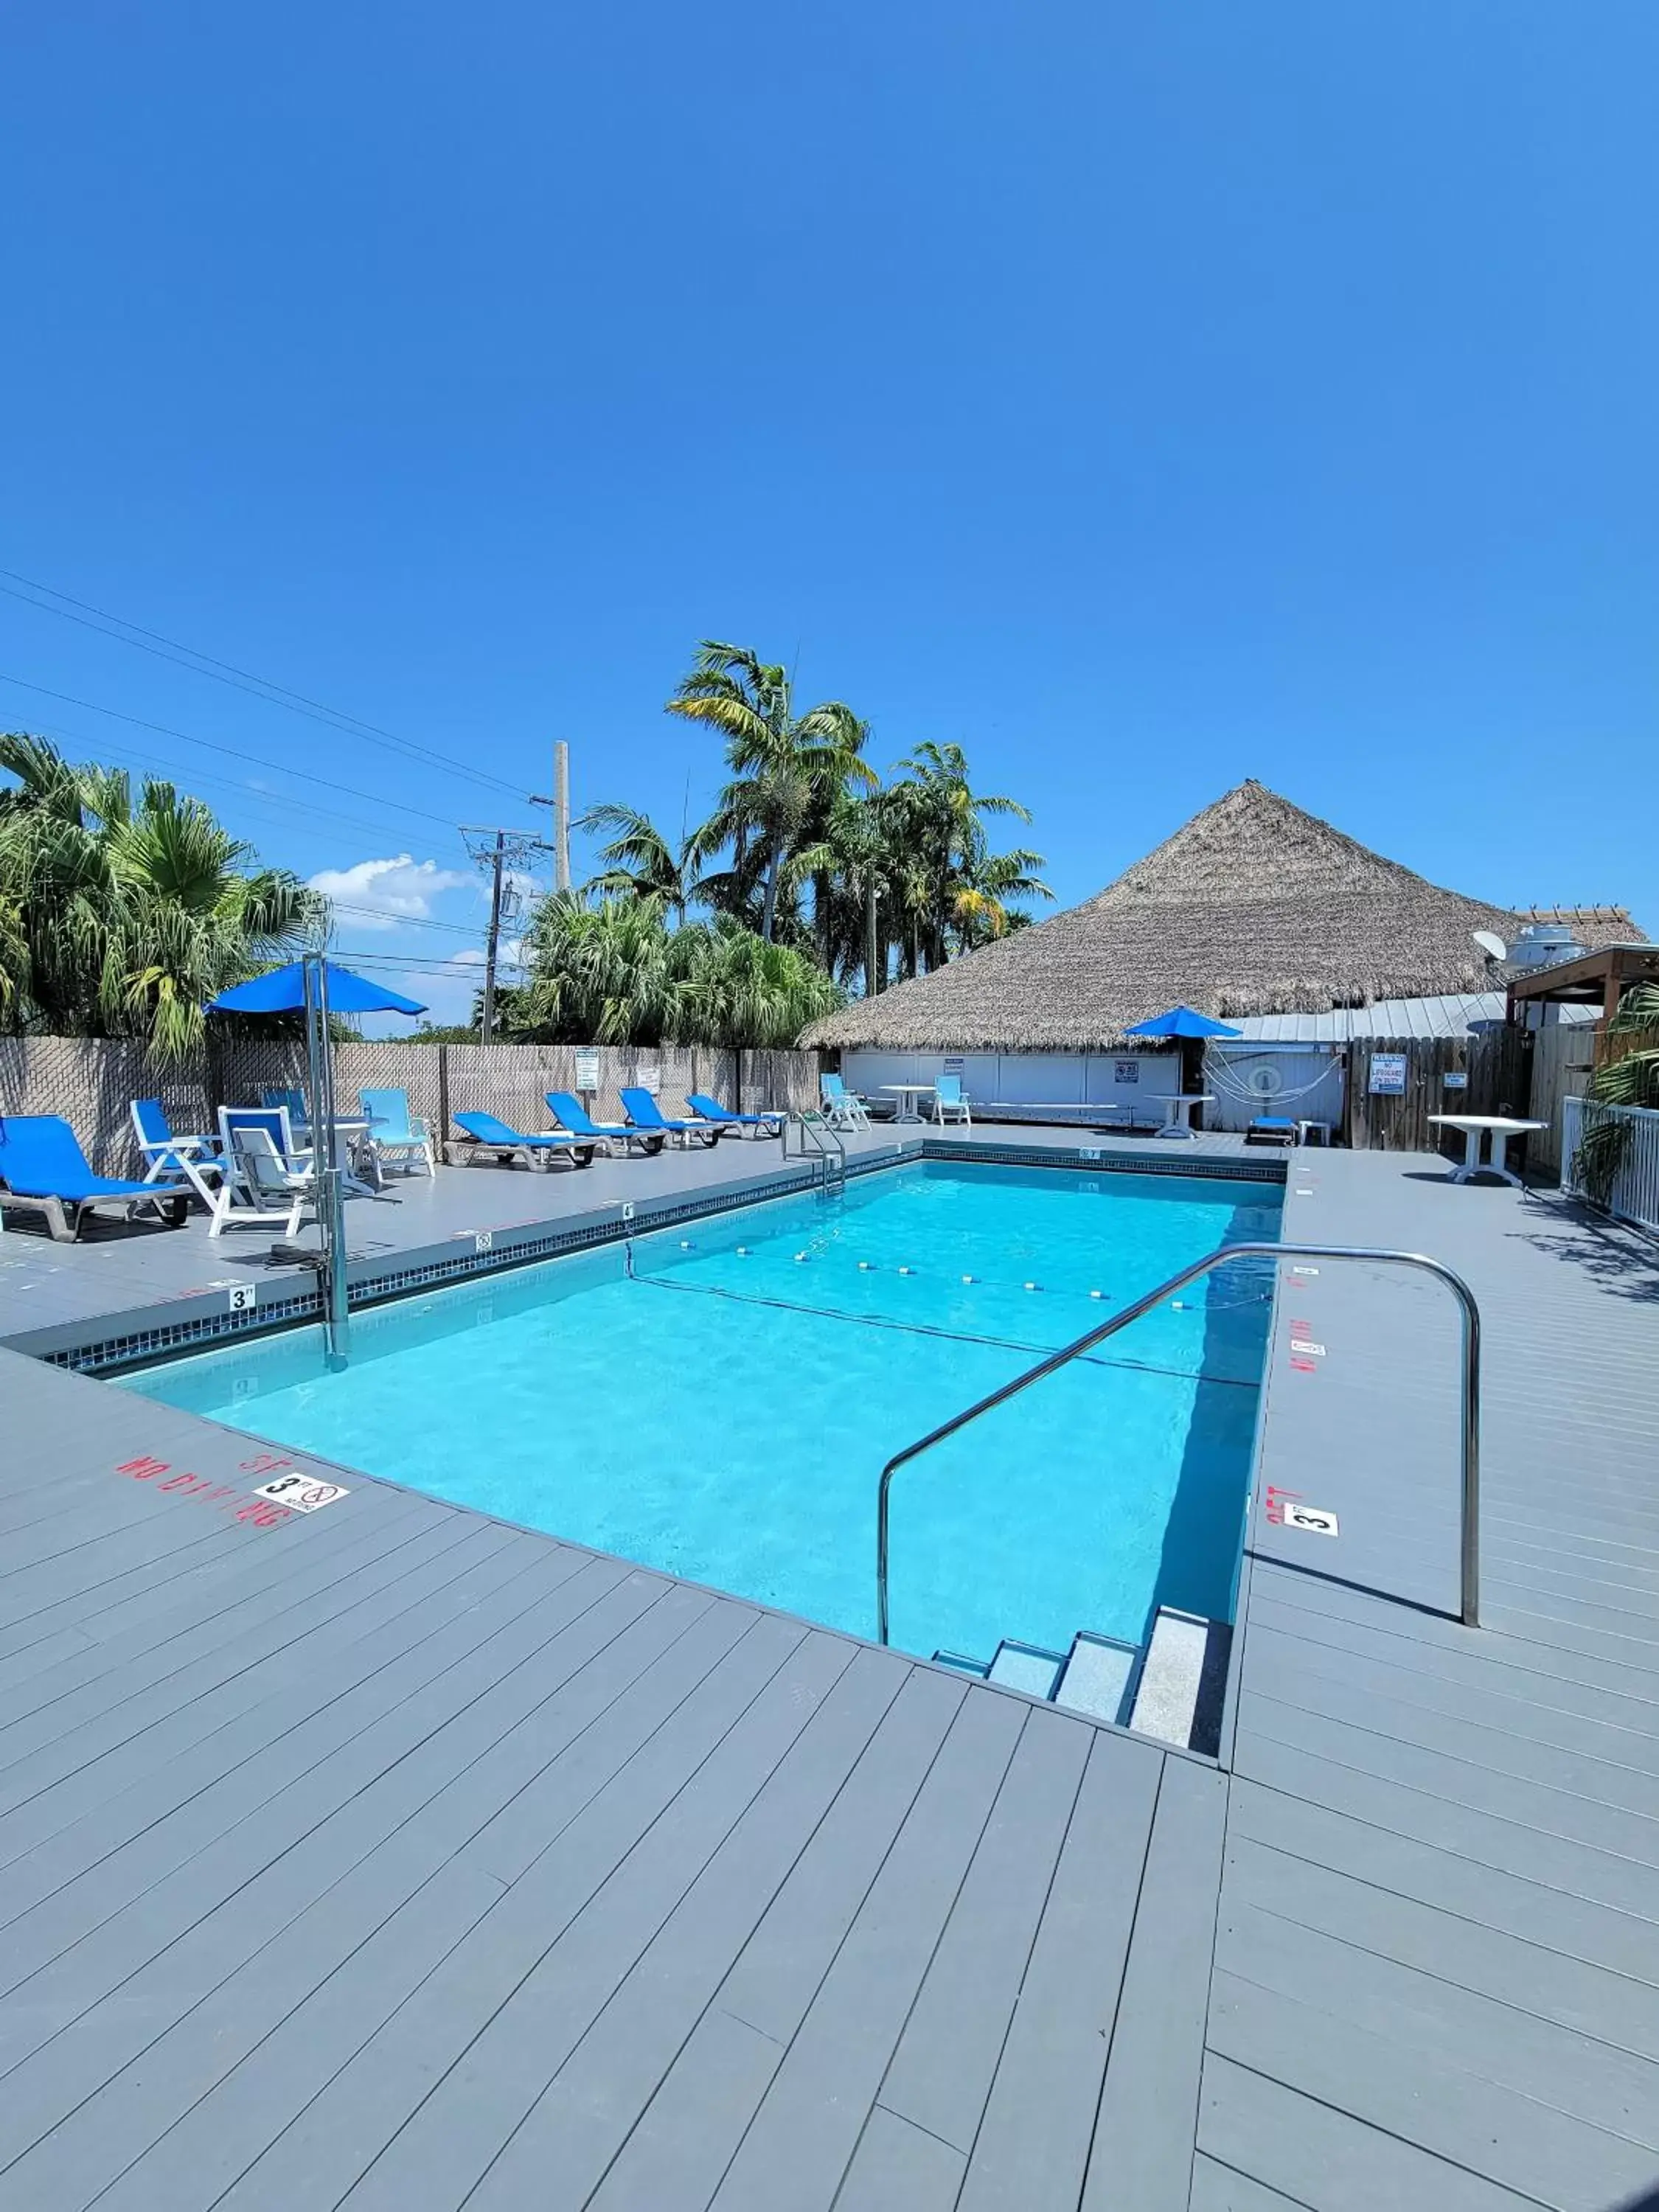 Property building, Swimming Pool in Looe Key Reef Resort and Dive Center